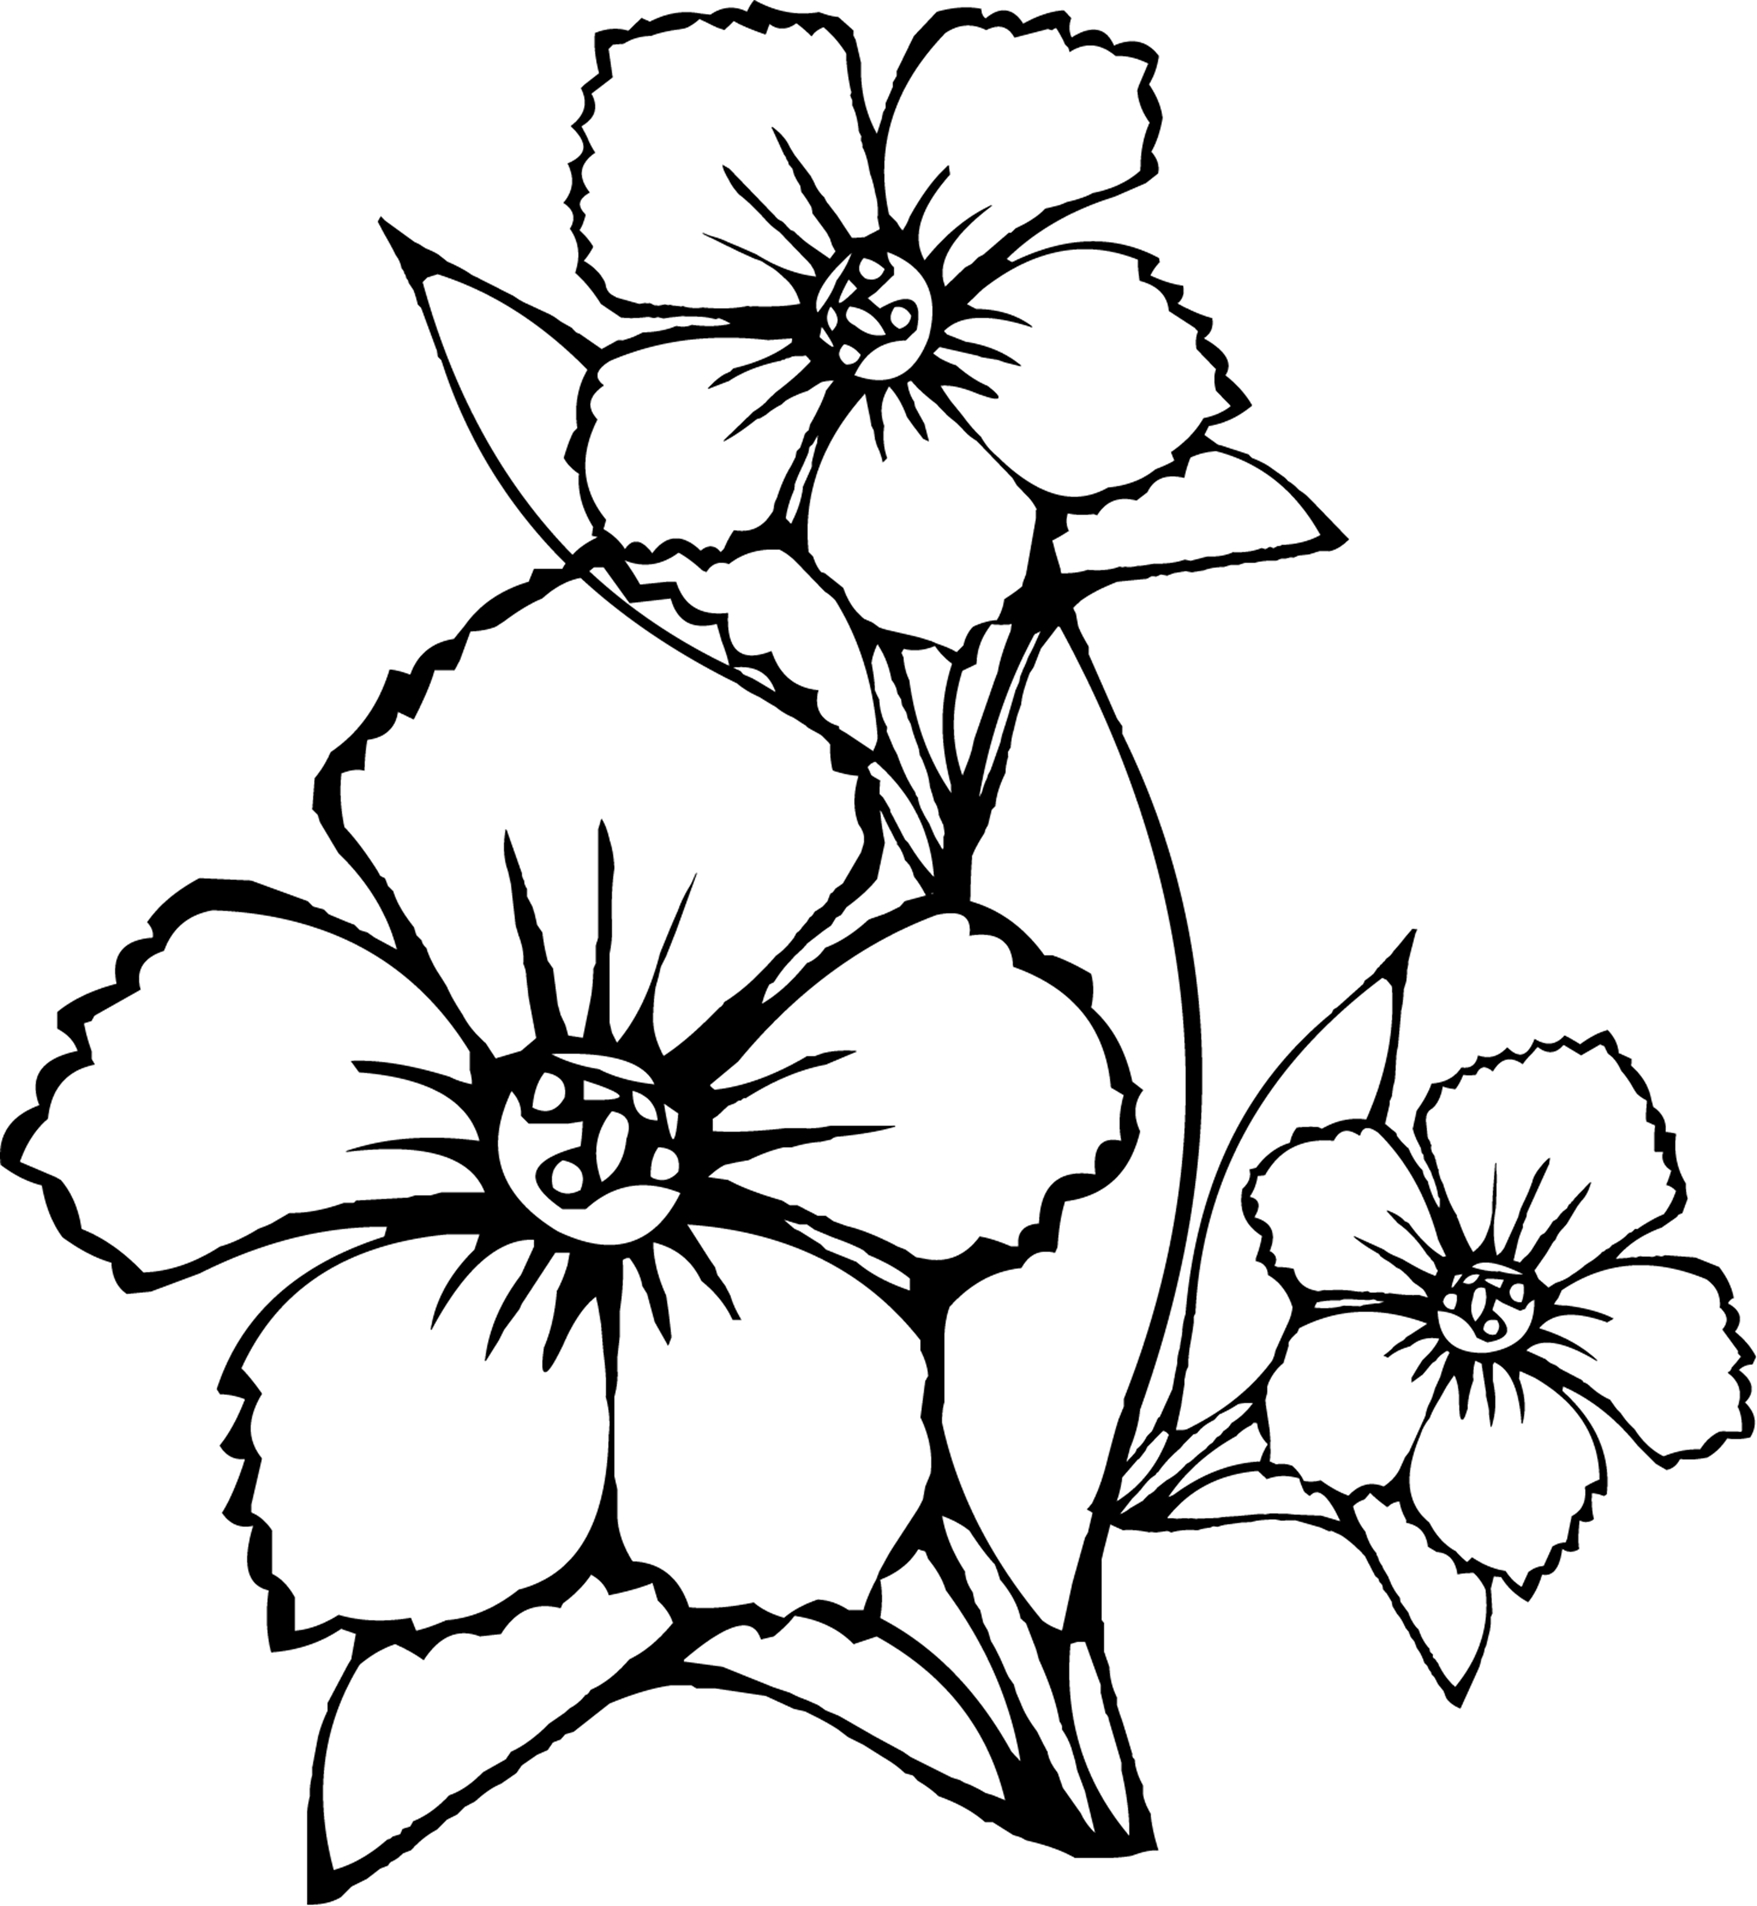 536 Simple Coloring Page Of A Plant with disney character